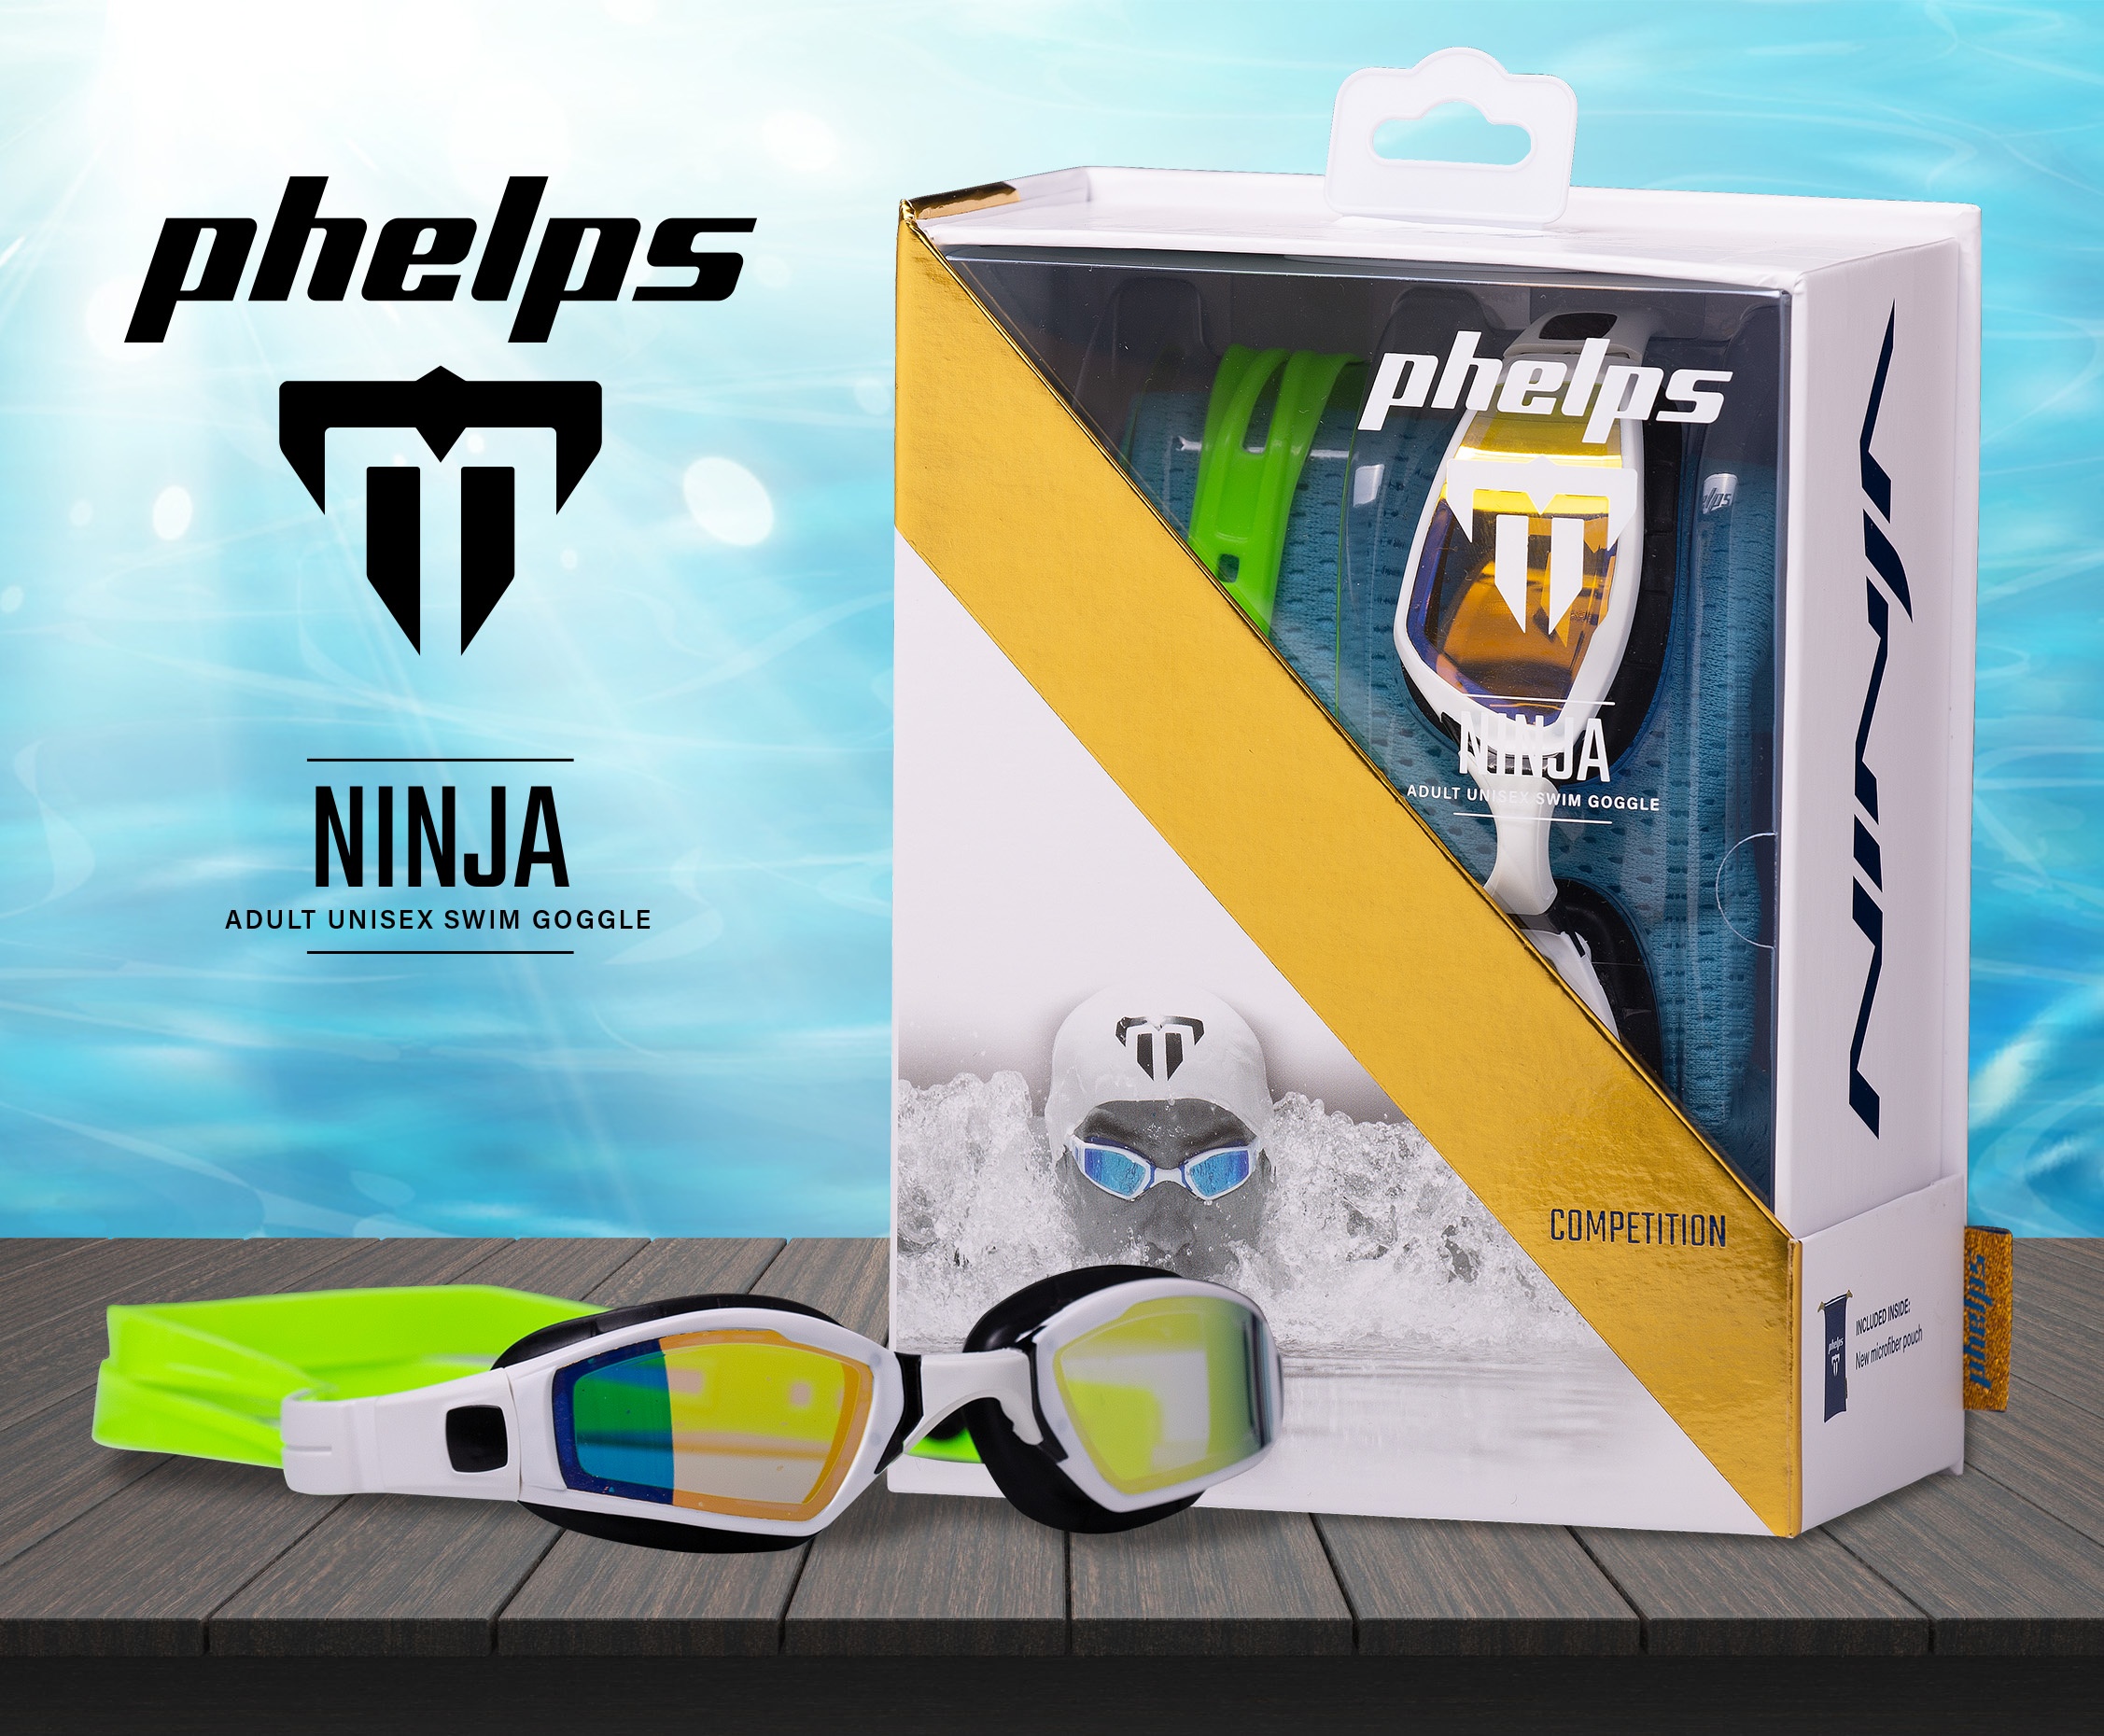 Phelps Brand Ninja Goggles Packaging Design Sets New Trend